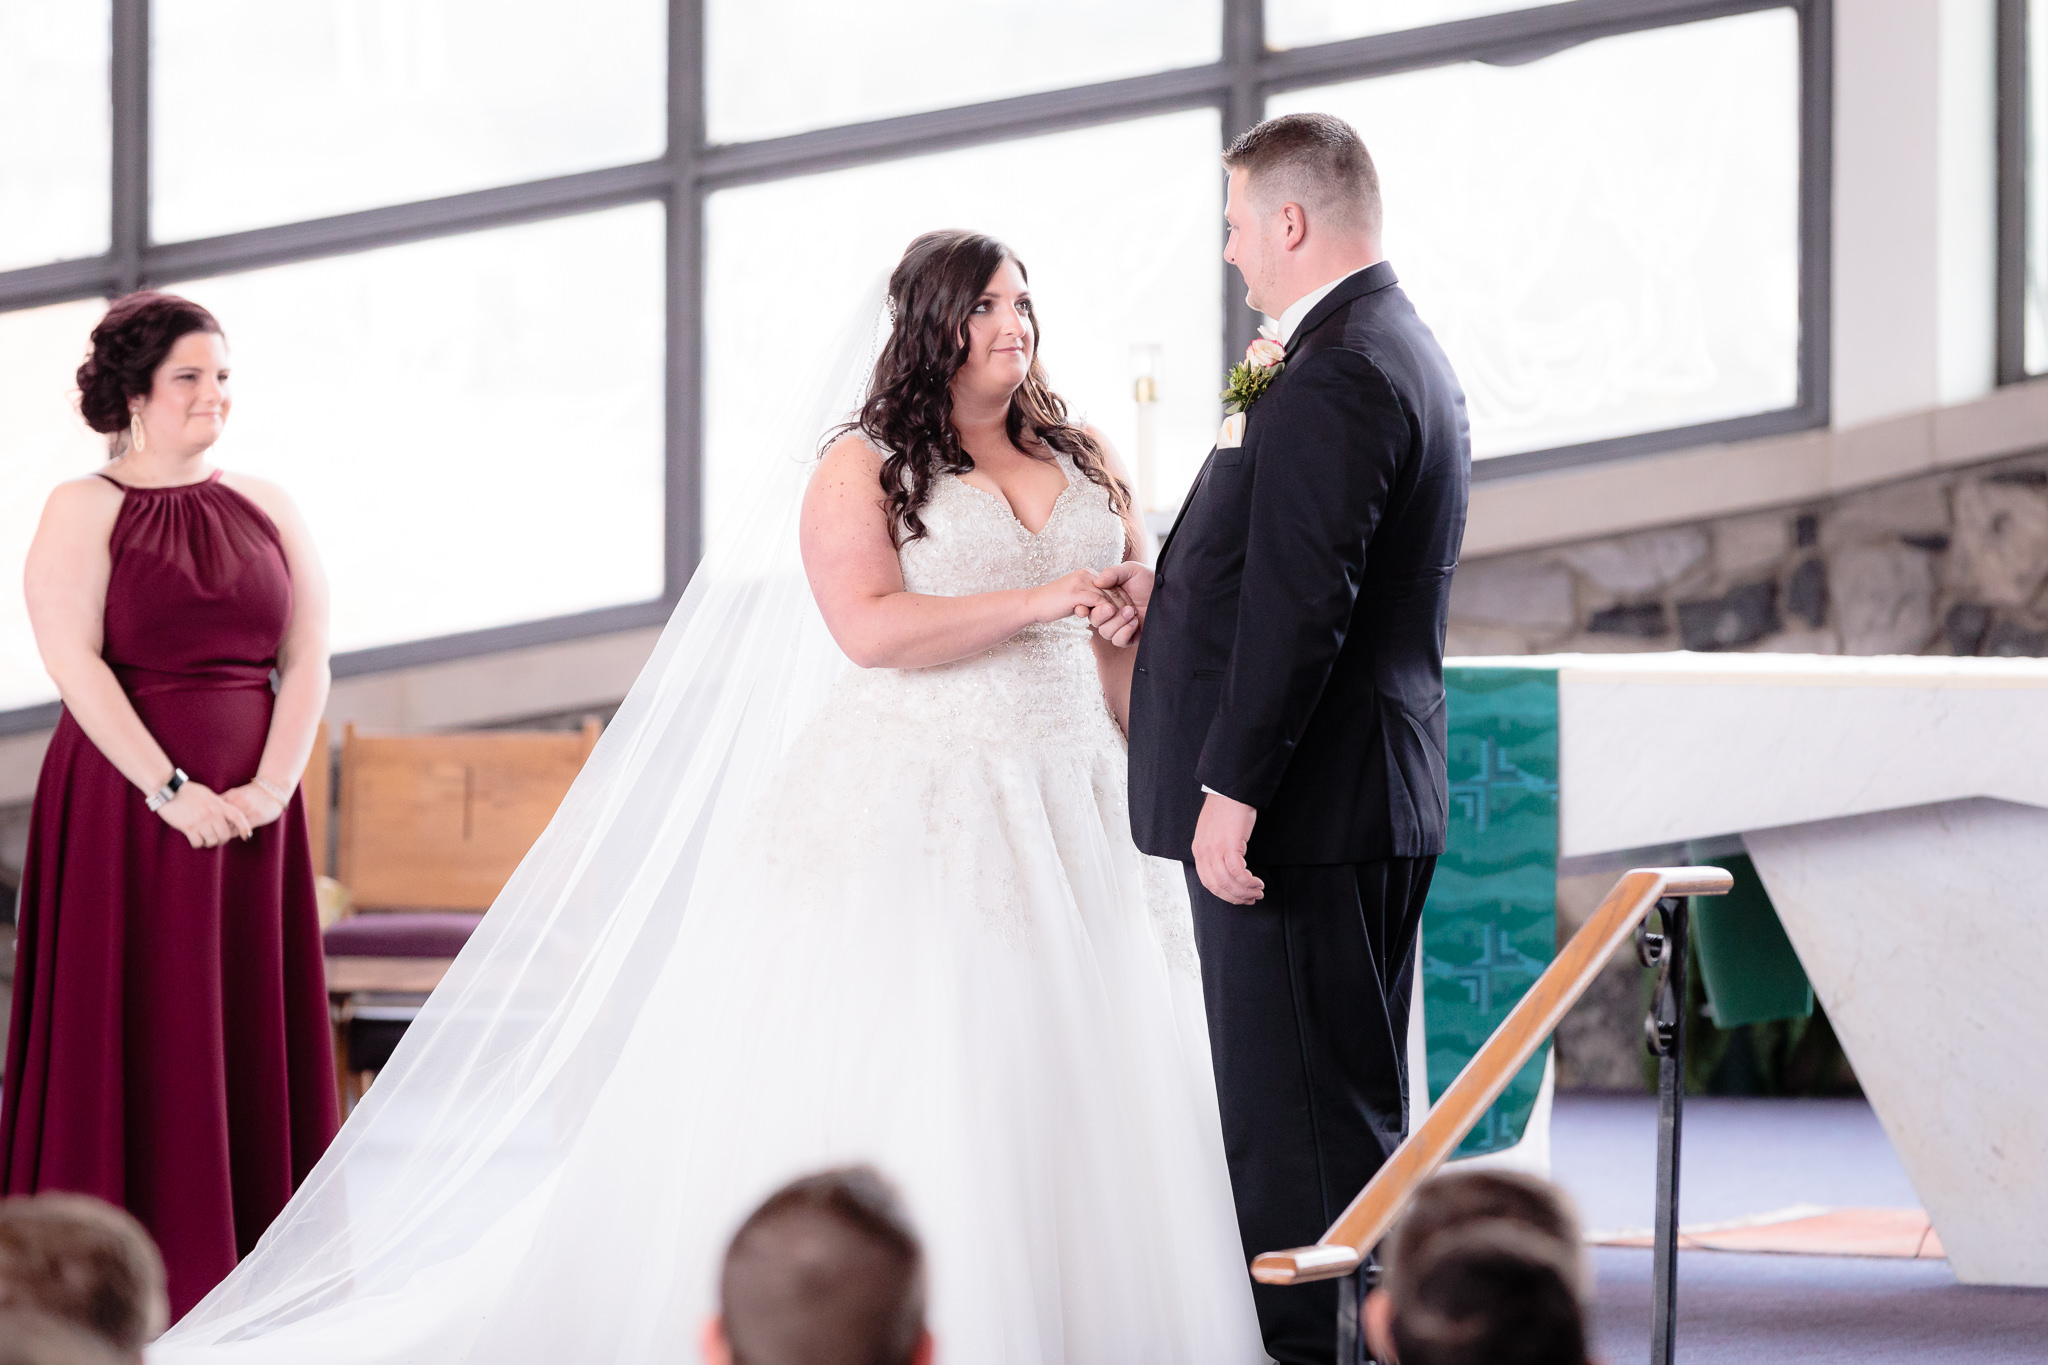 Bride looks at the groom during vows at St. Malachy